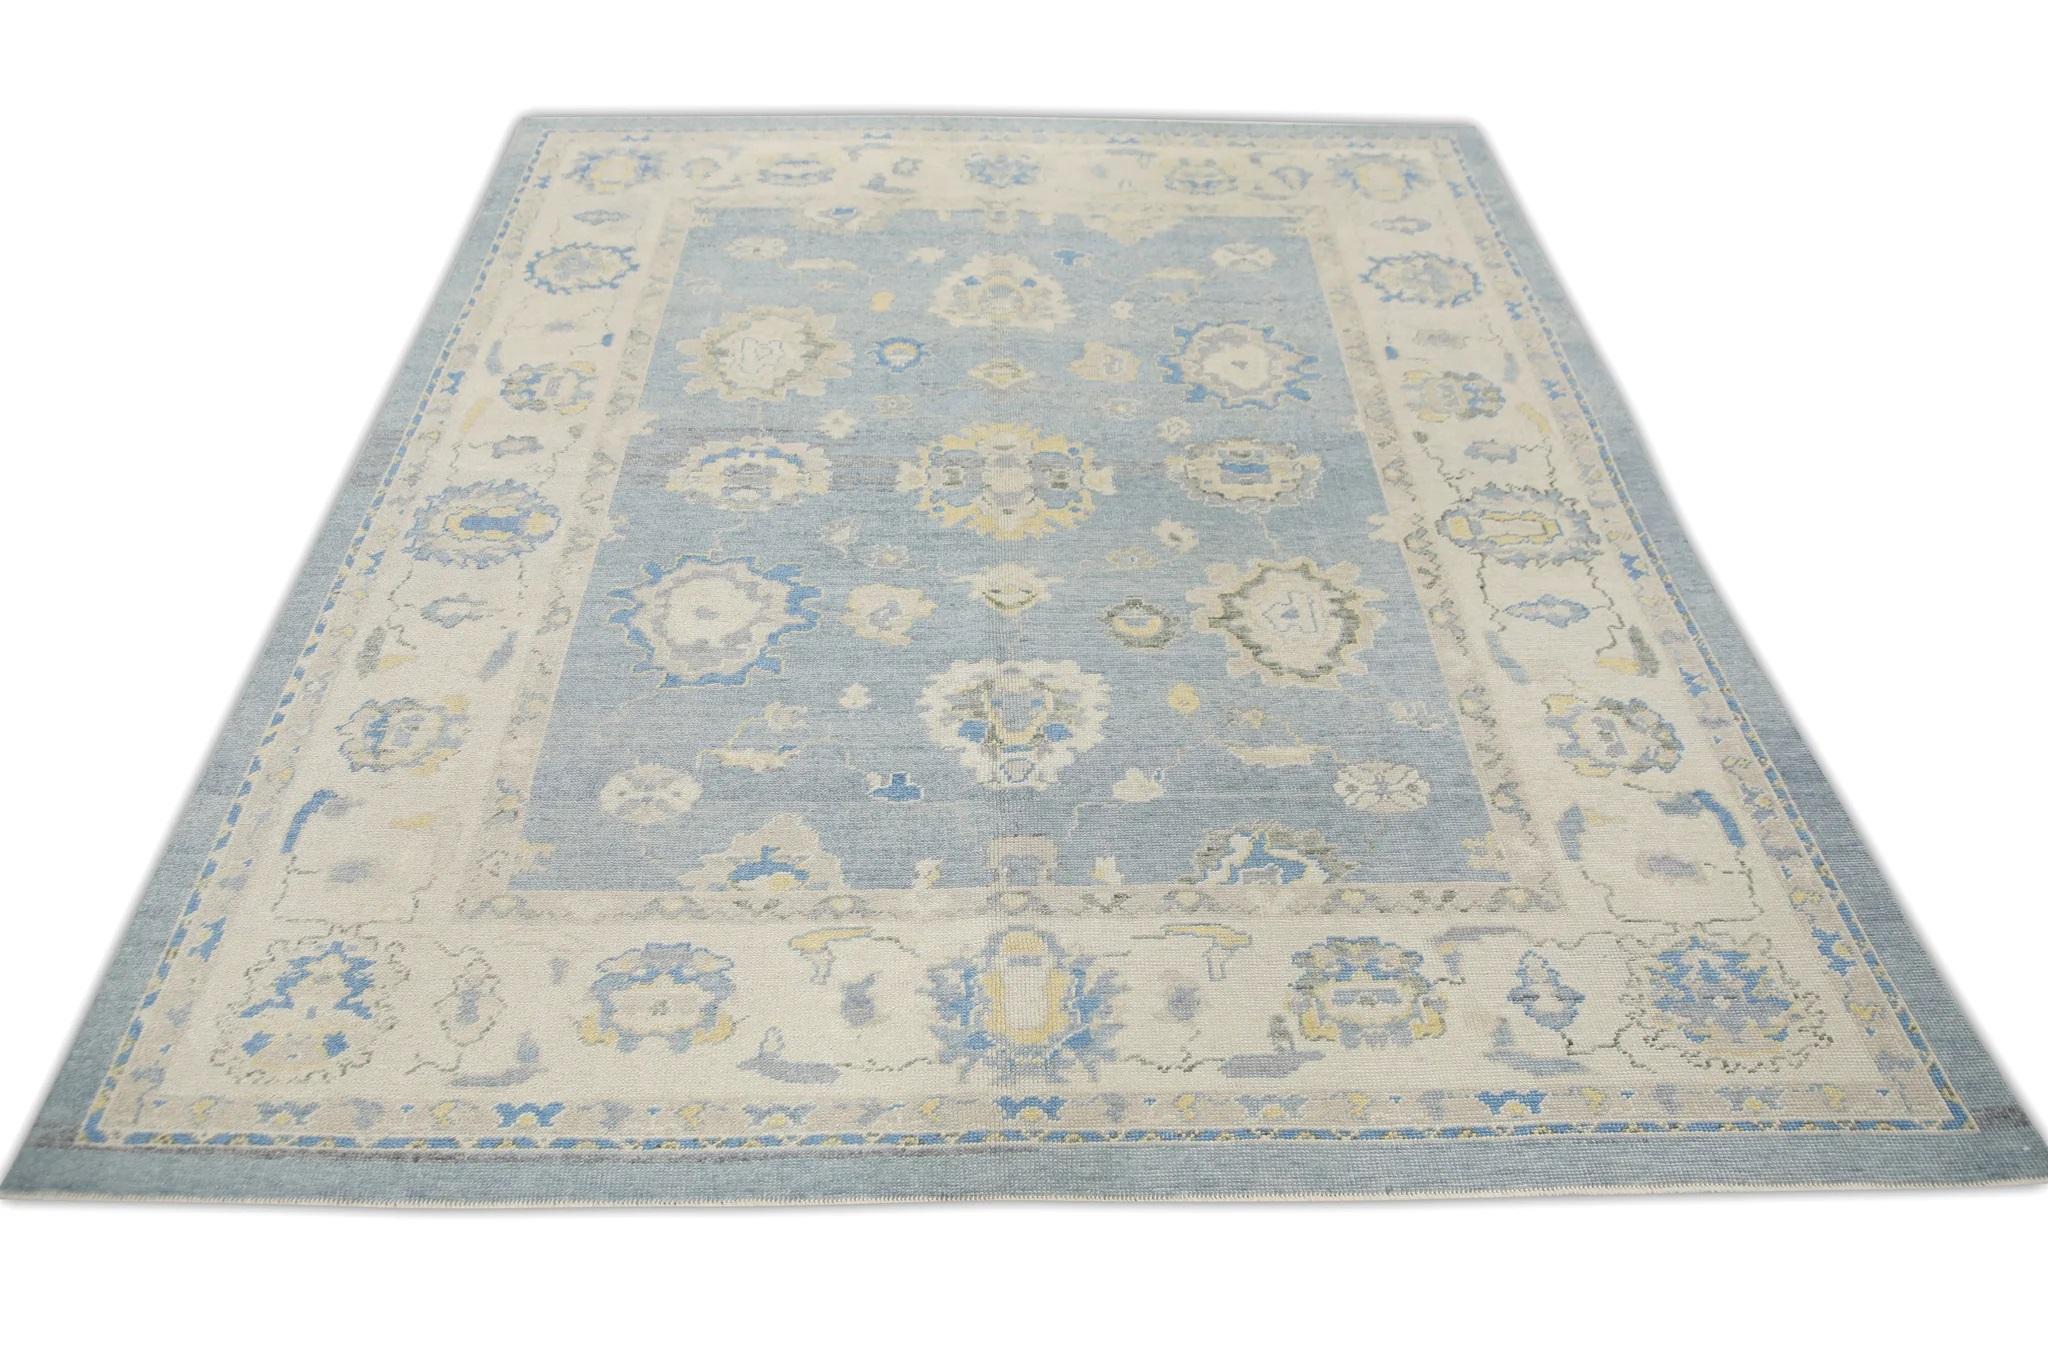 Contemporary Blue & Yellow Floral Handwoven Wool Turkish Oushak Rug 8' x 9'10